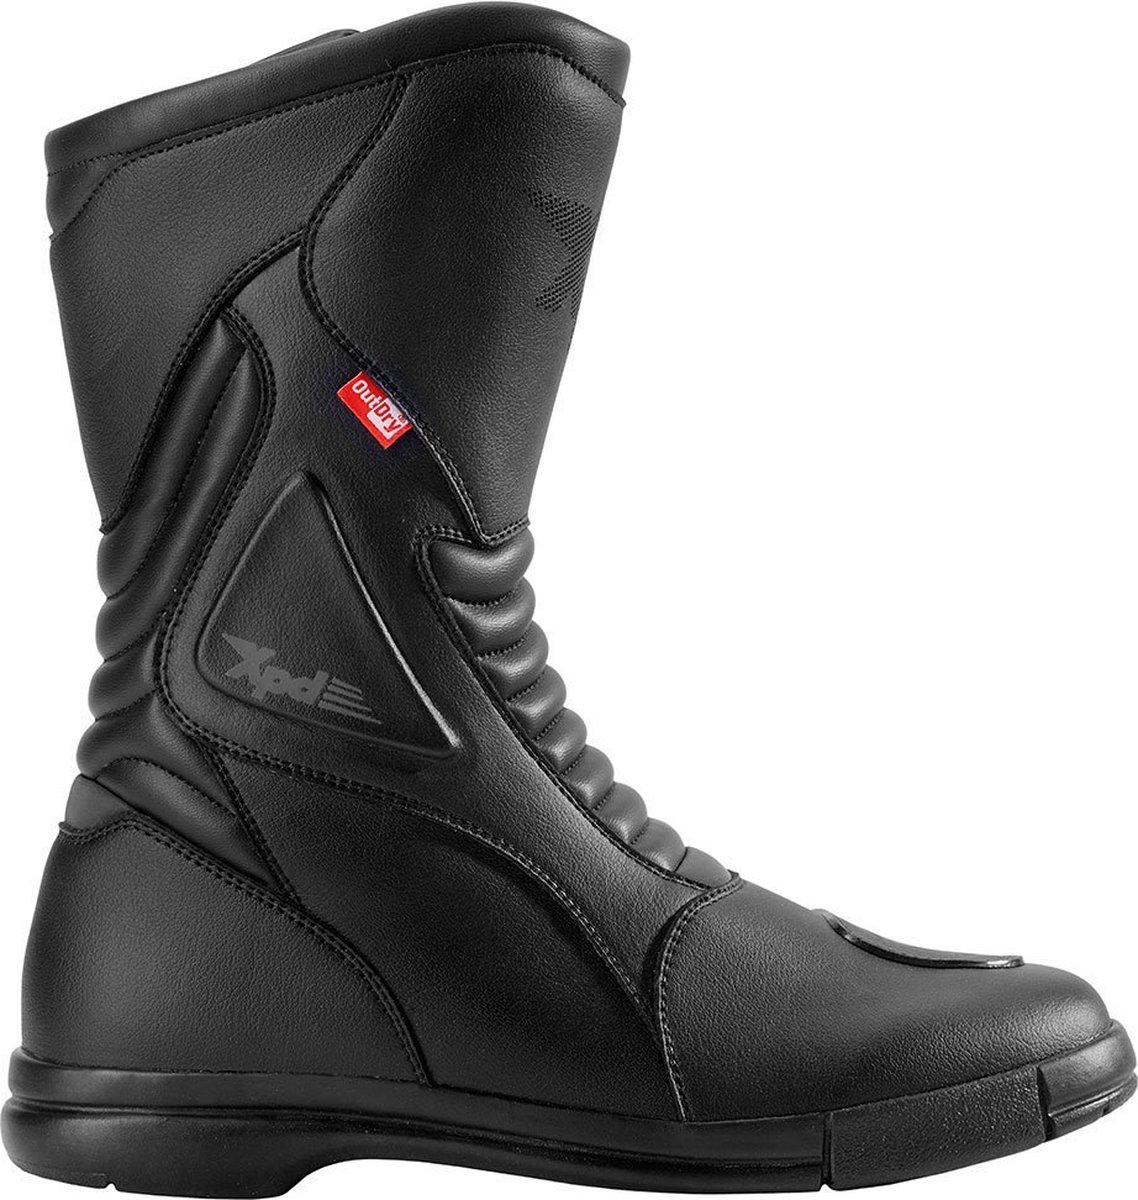 XPD X-TRAIL OUTDRY BLACK BOOTS 42 - Maat - Laars